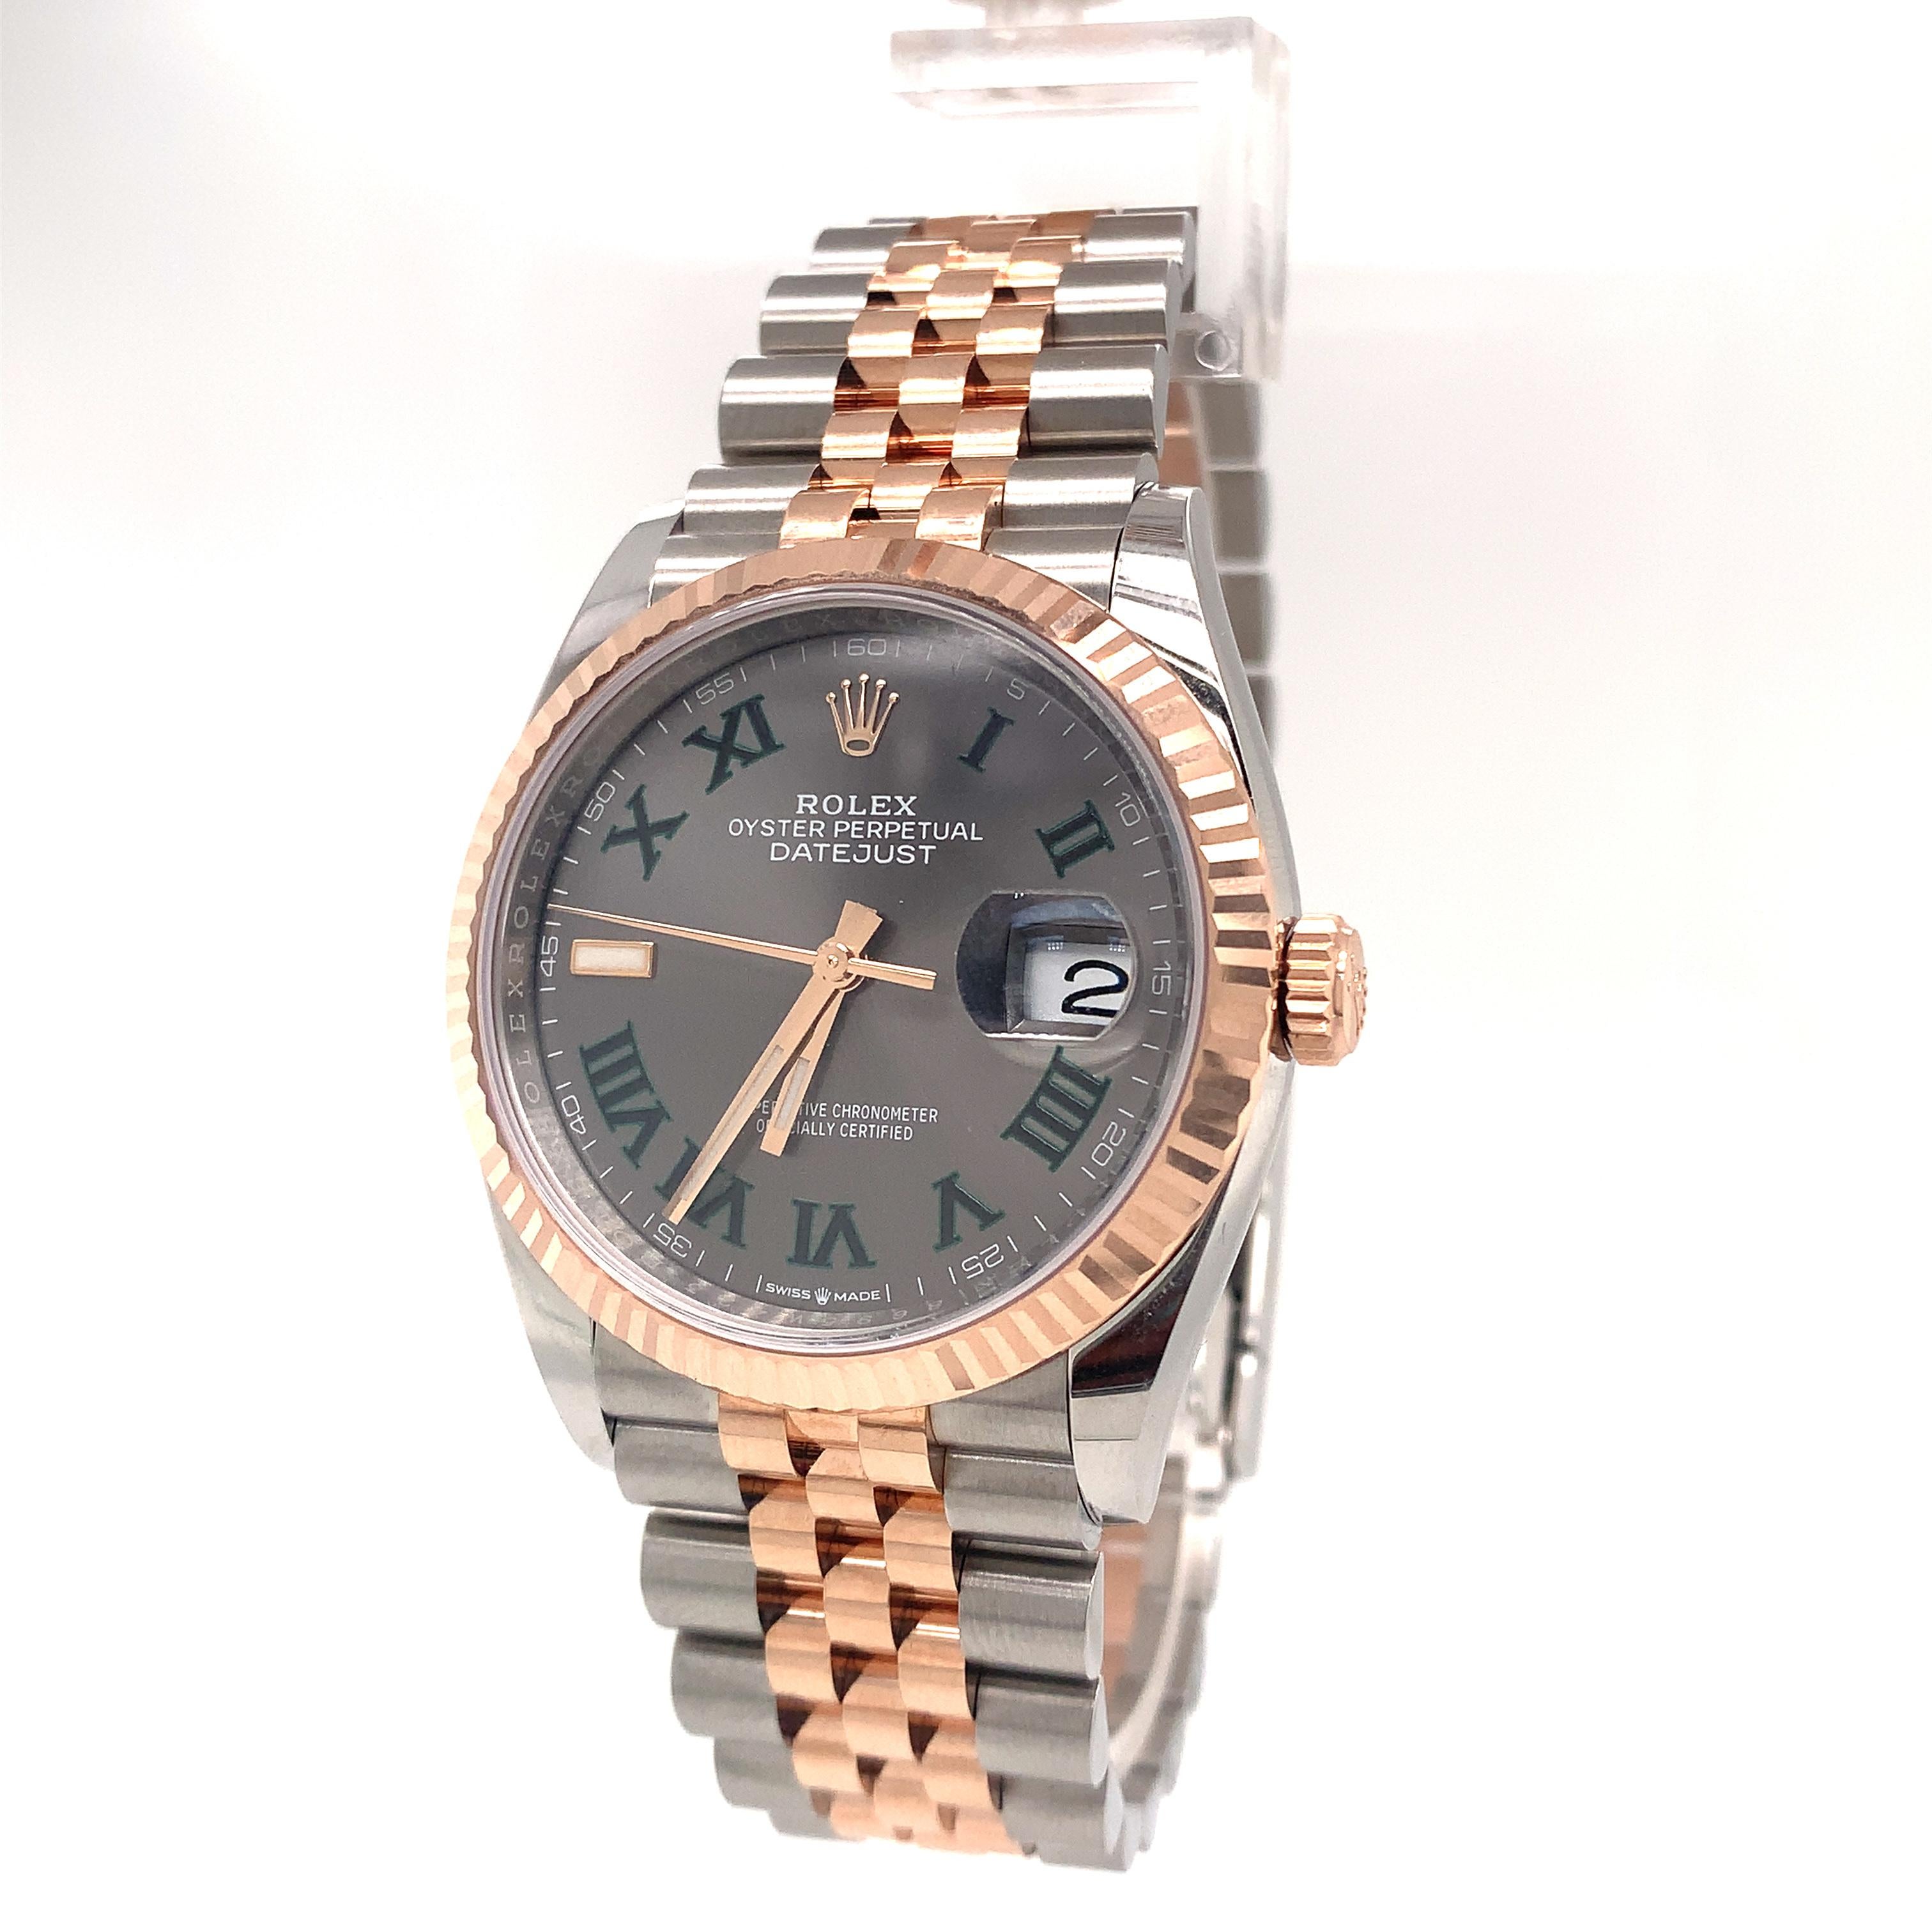 This Oyster Perpetual Datejust 36 in Oystersteel and Rose gold features a champagne-color dial and a Jubilee bracelet. The light reflections on the case sides and lugs highlight the elegant profile of the 36 mm Oyster case, which is fitted with a